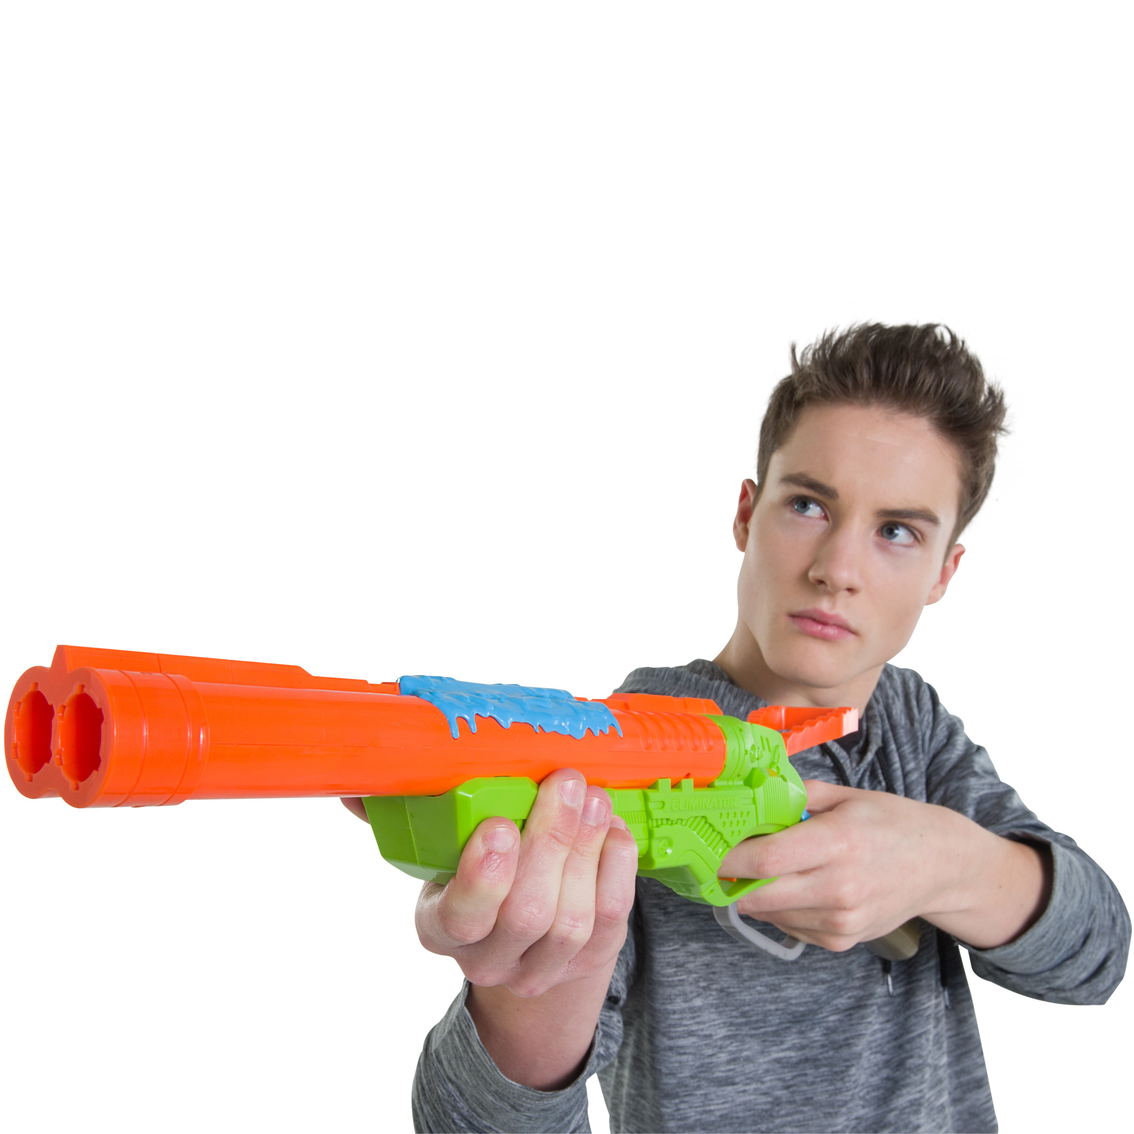 X Shot Bug Attack Rapid Fire Blaster With 2 Bugs and 8 Darts ZURU for sale online 